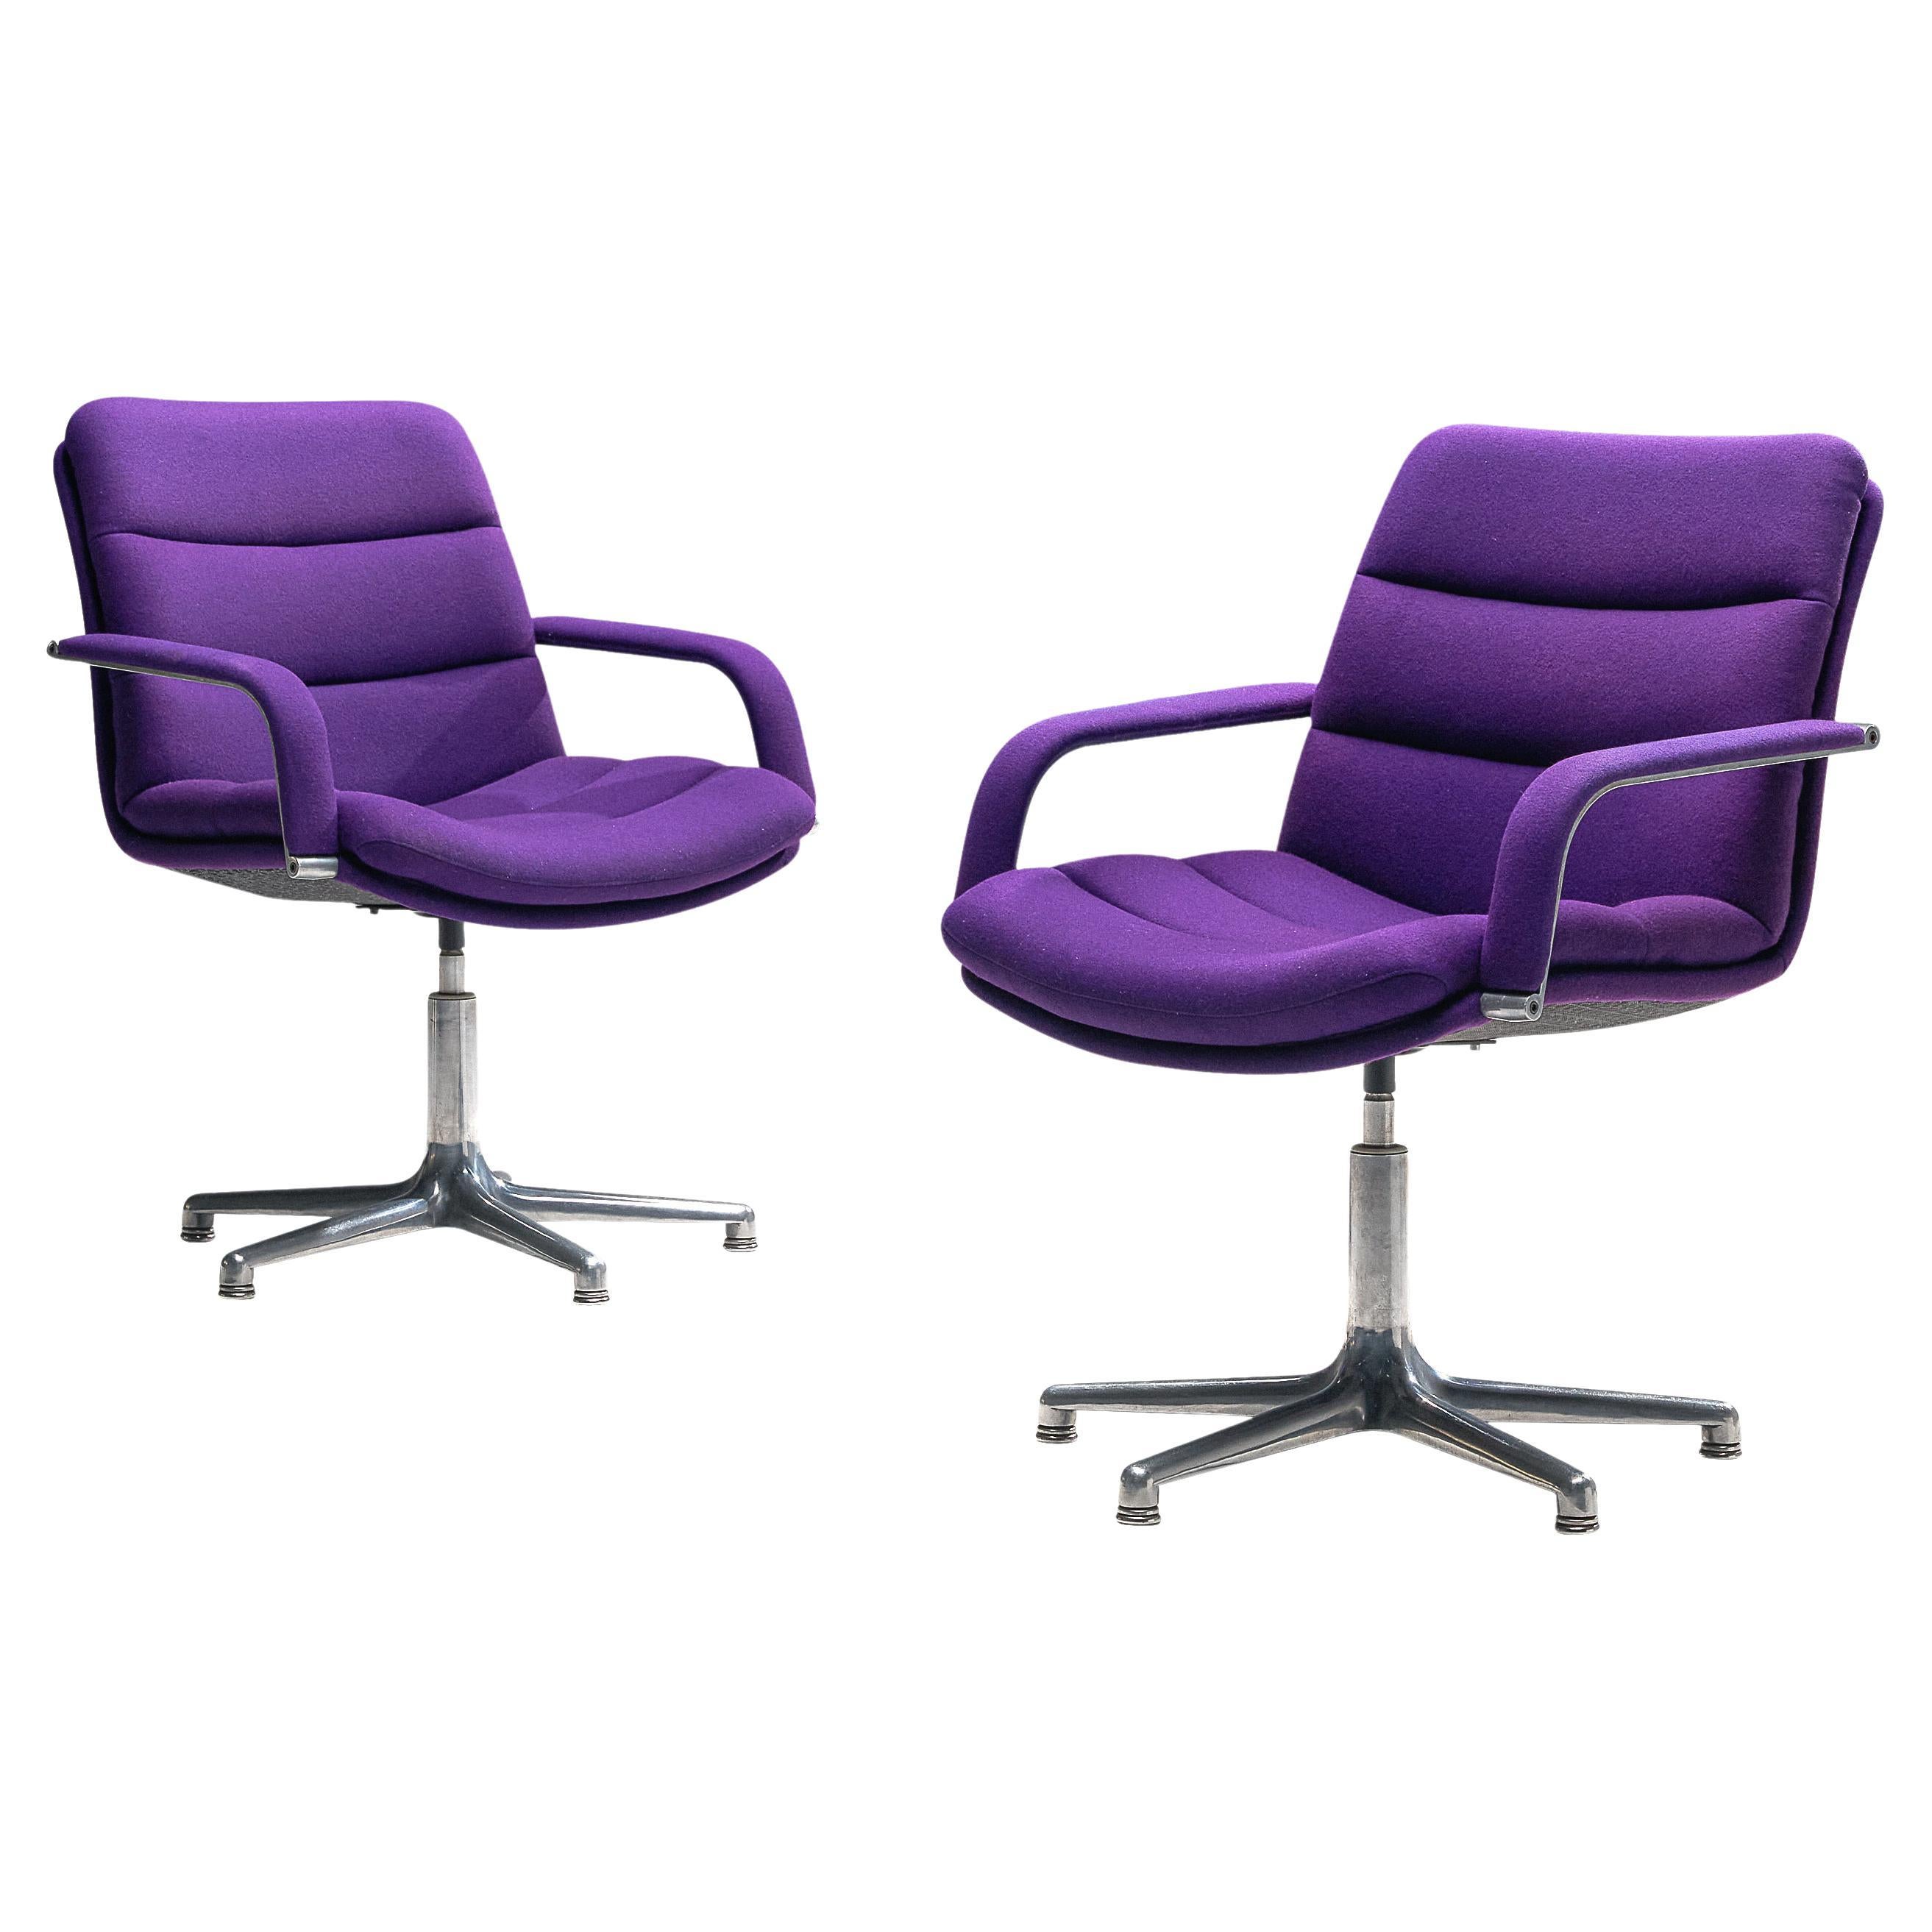 Geoffrey Harcourt for Artifort Pair of Swivel Office Chairs in Purple Upholstery